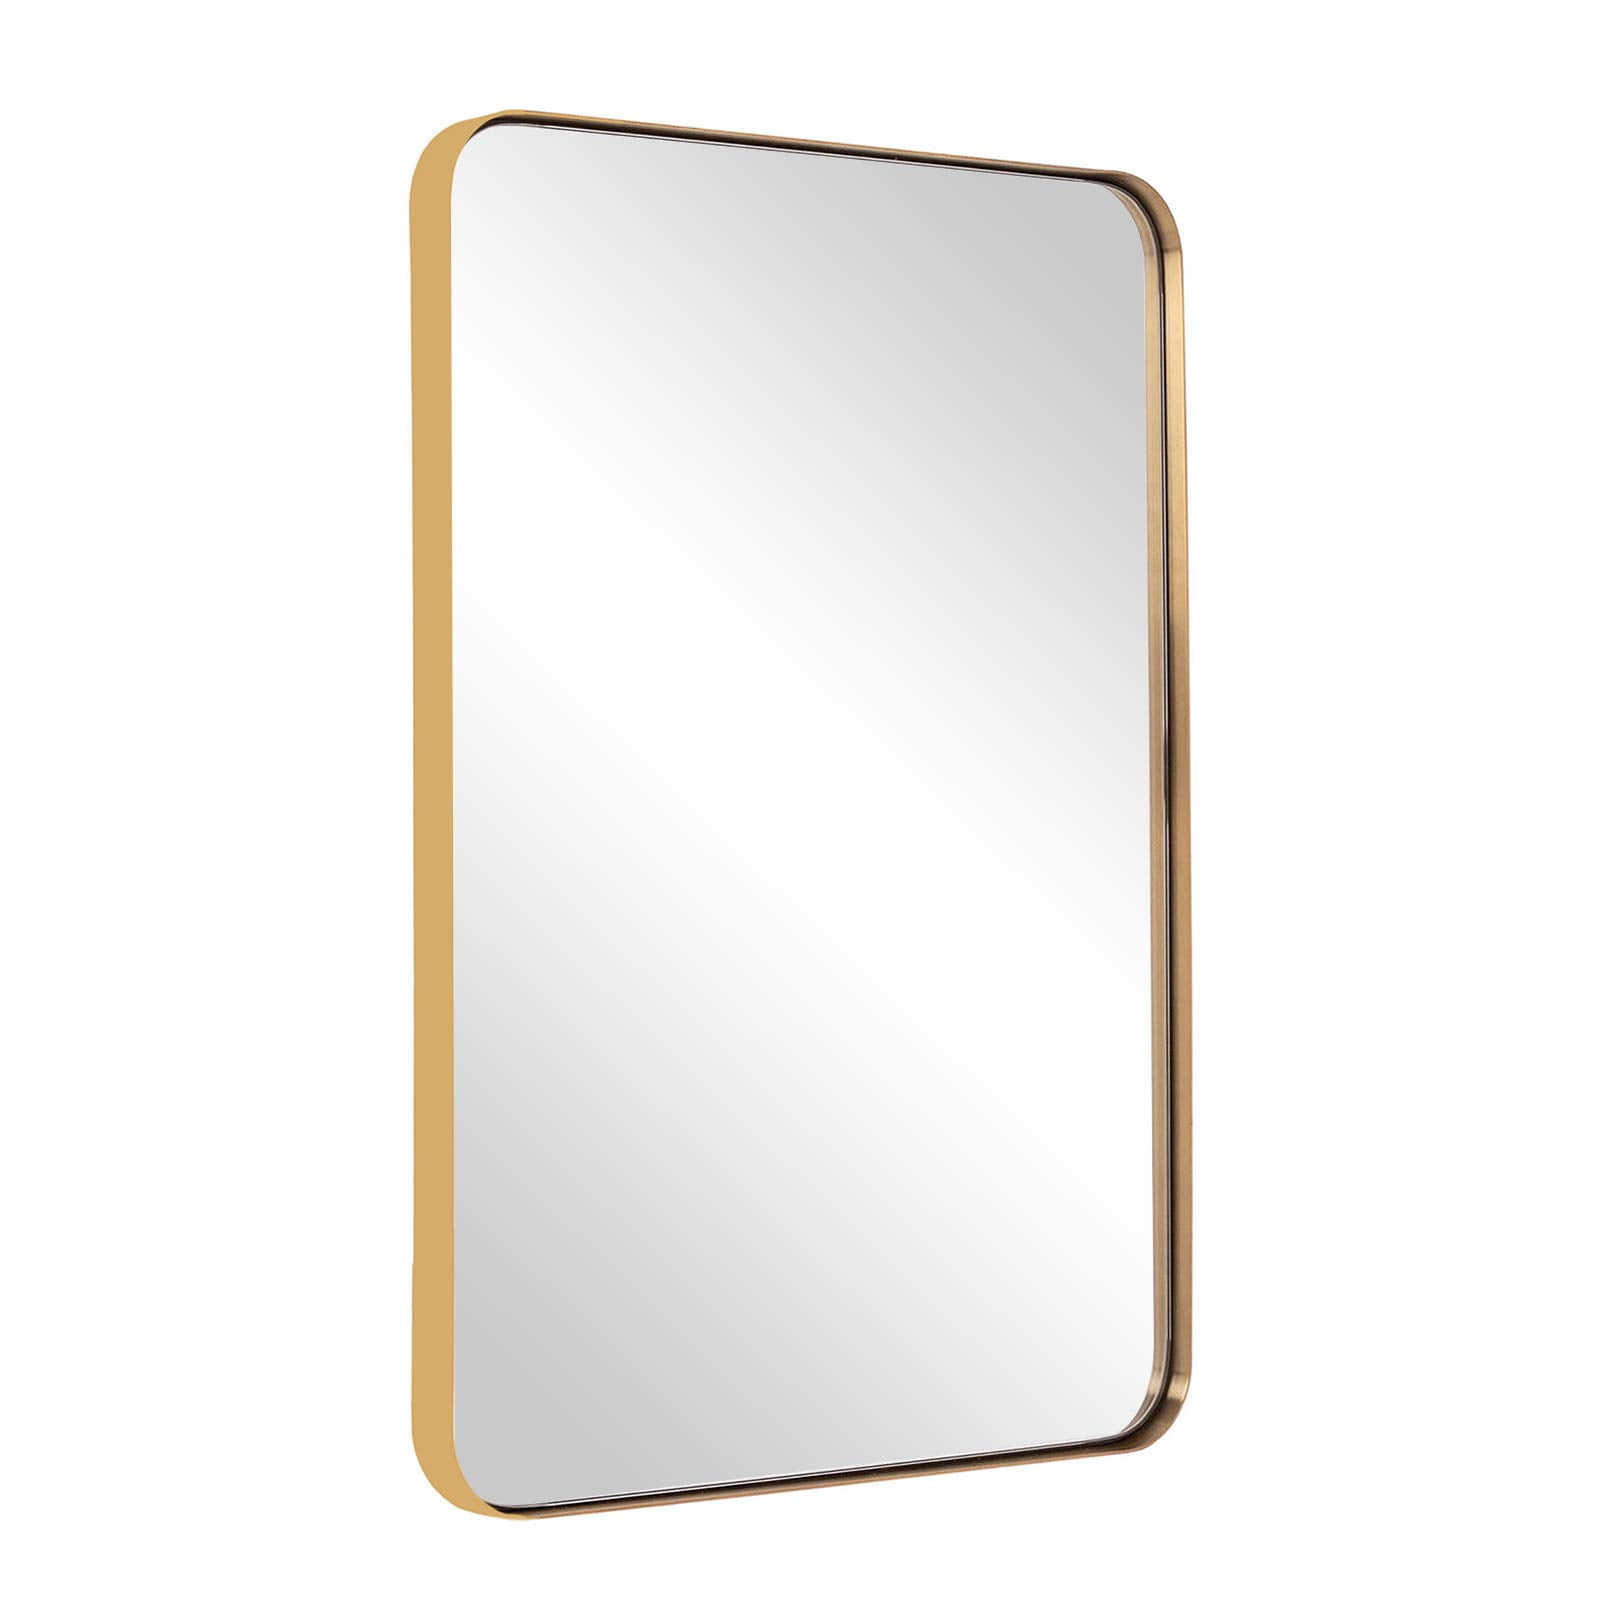 Andy Star Gold Wall Mirror 24x36 Inch, Modern Stainless Steel Frame Mirror